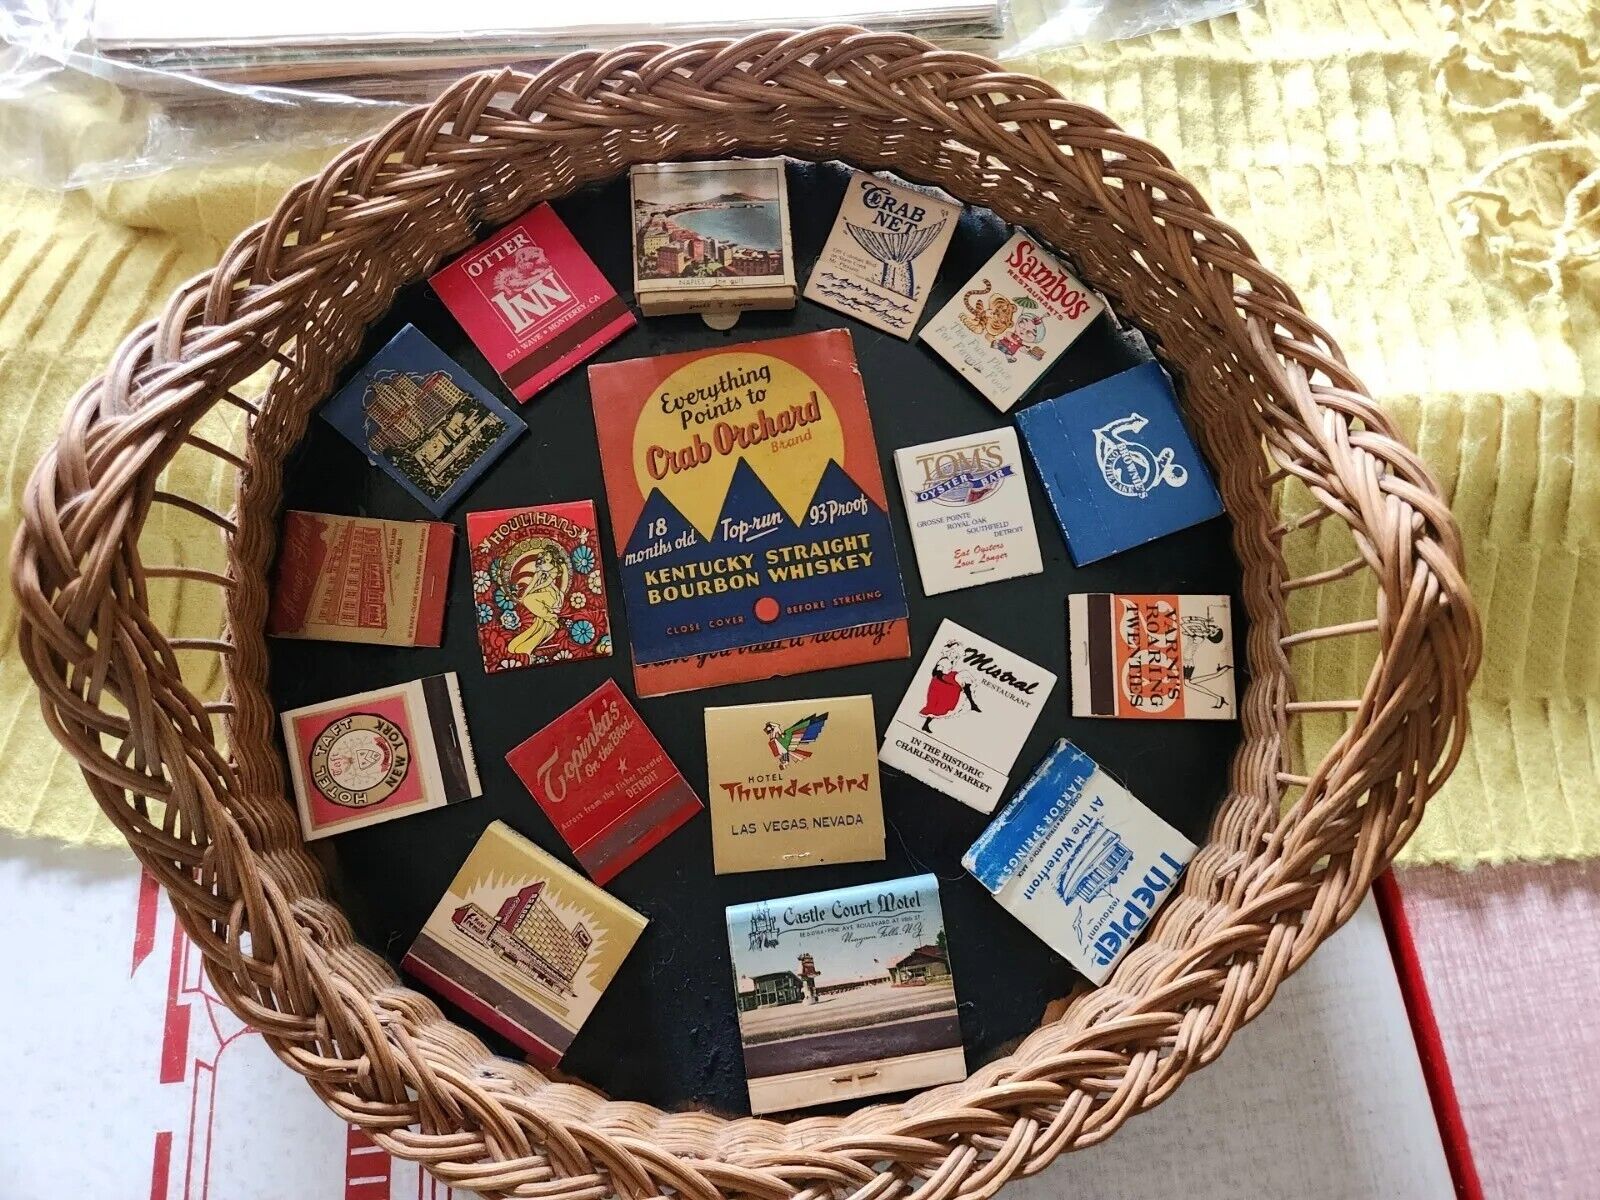 Vintage Matchbook Lot Of 18 DISPLAYED ON WICKER CRAB ORCHARD WHISKEY, Man Cave